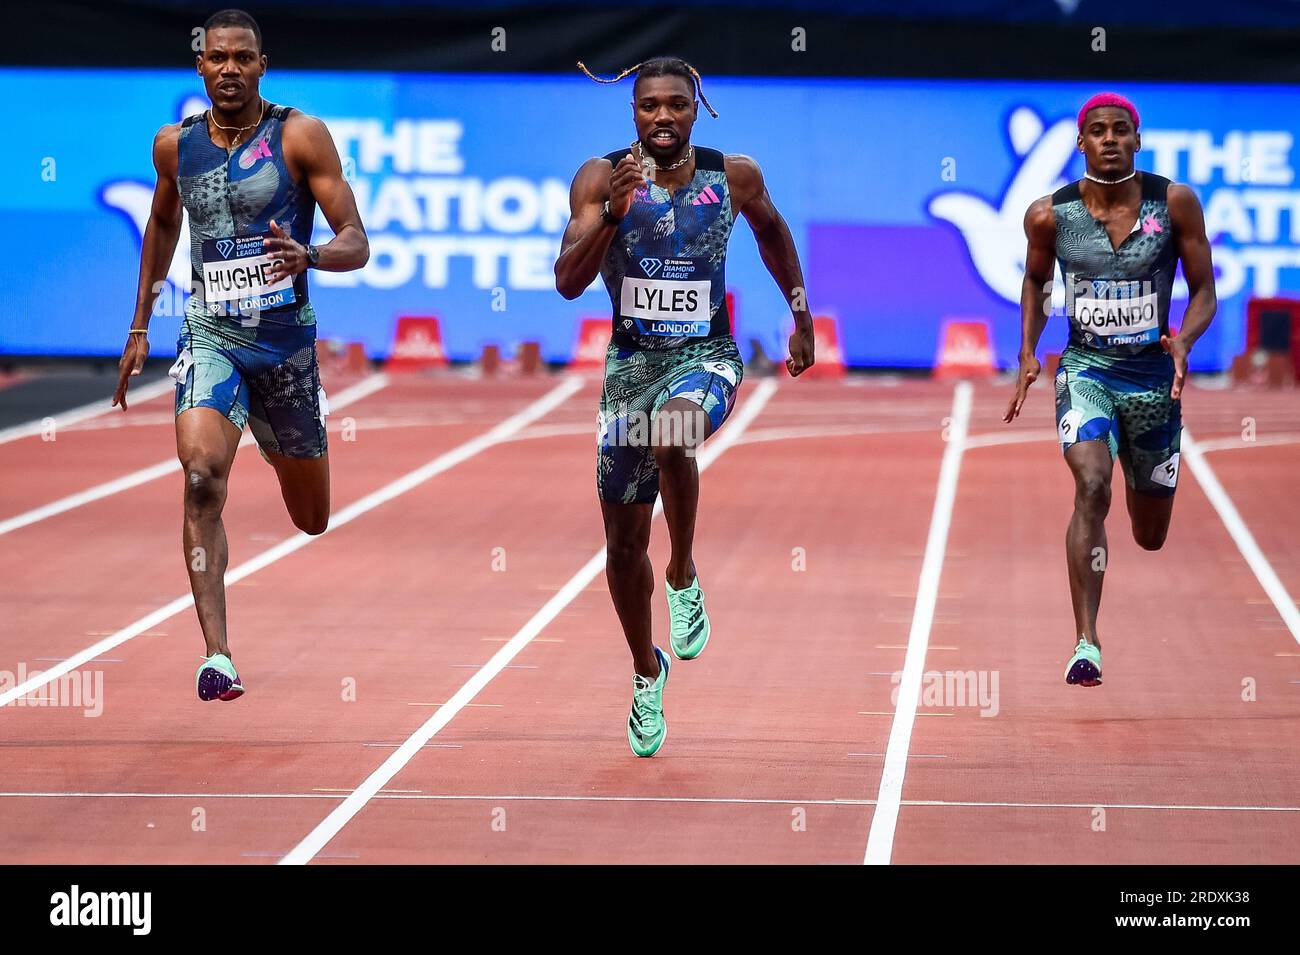 London, Britain. 23rd July, 2023. Noah Lyles (C) of the Unite States competes during the men's 200m final at the Diamond Leagues Athletics Meeting in London, Britain, July 23, 2023. Credit: Stephen Chung/Xinhua/Alamy Live News Stock Photo